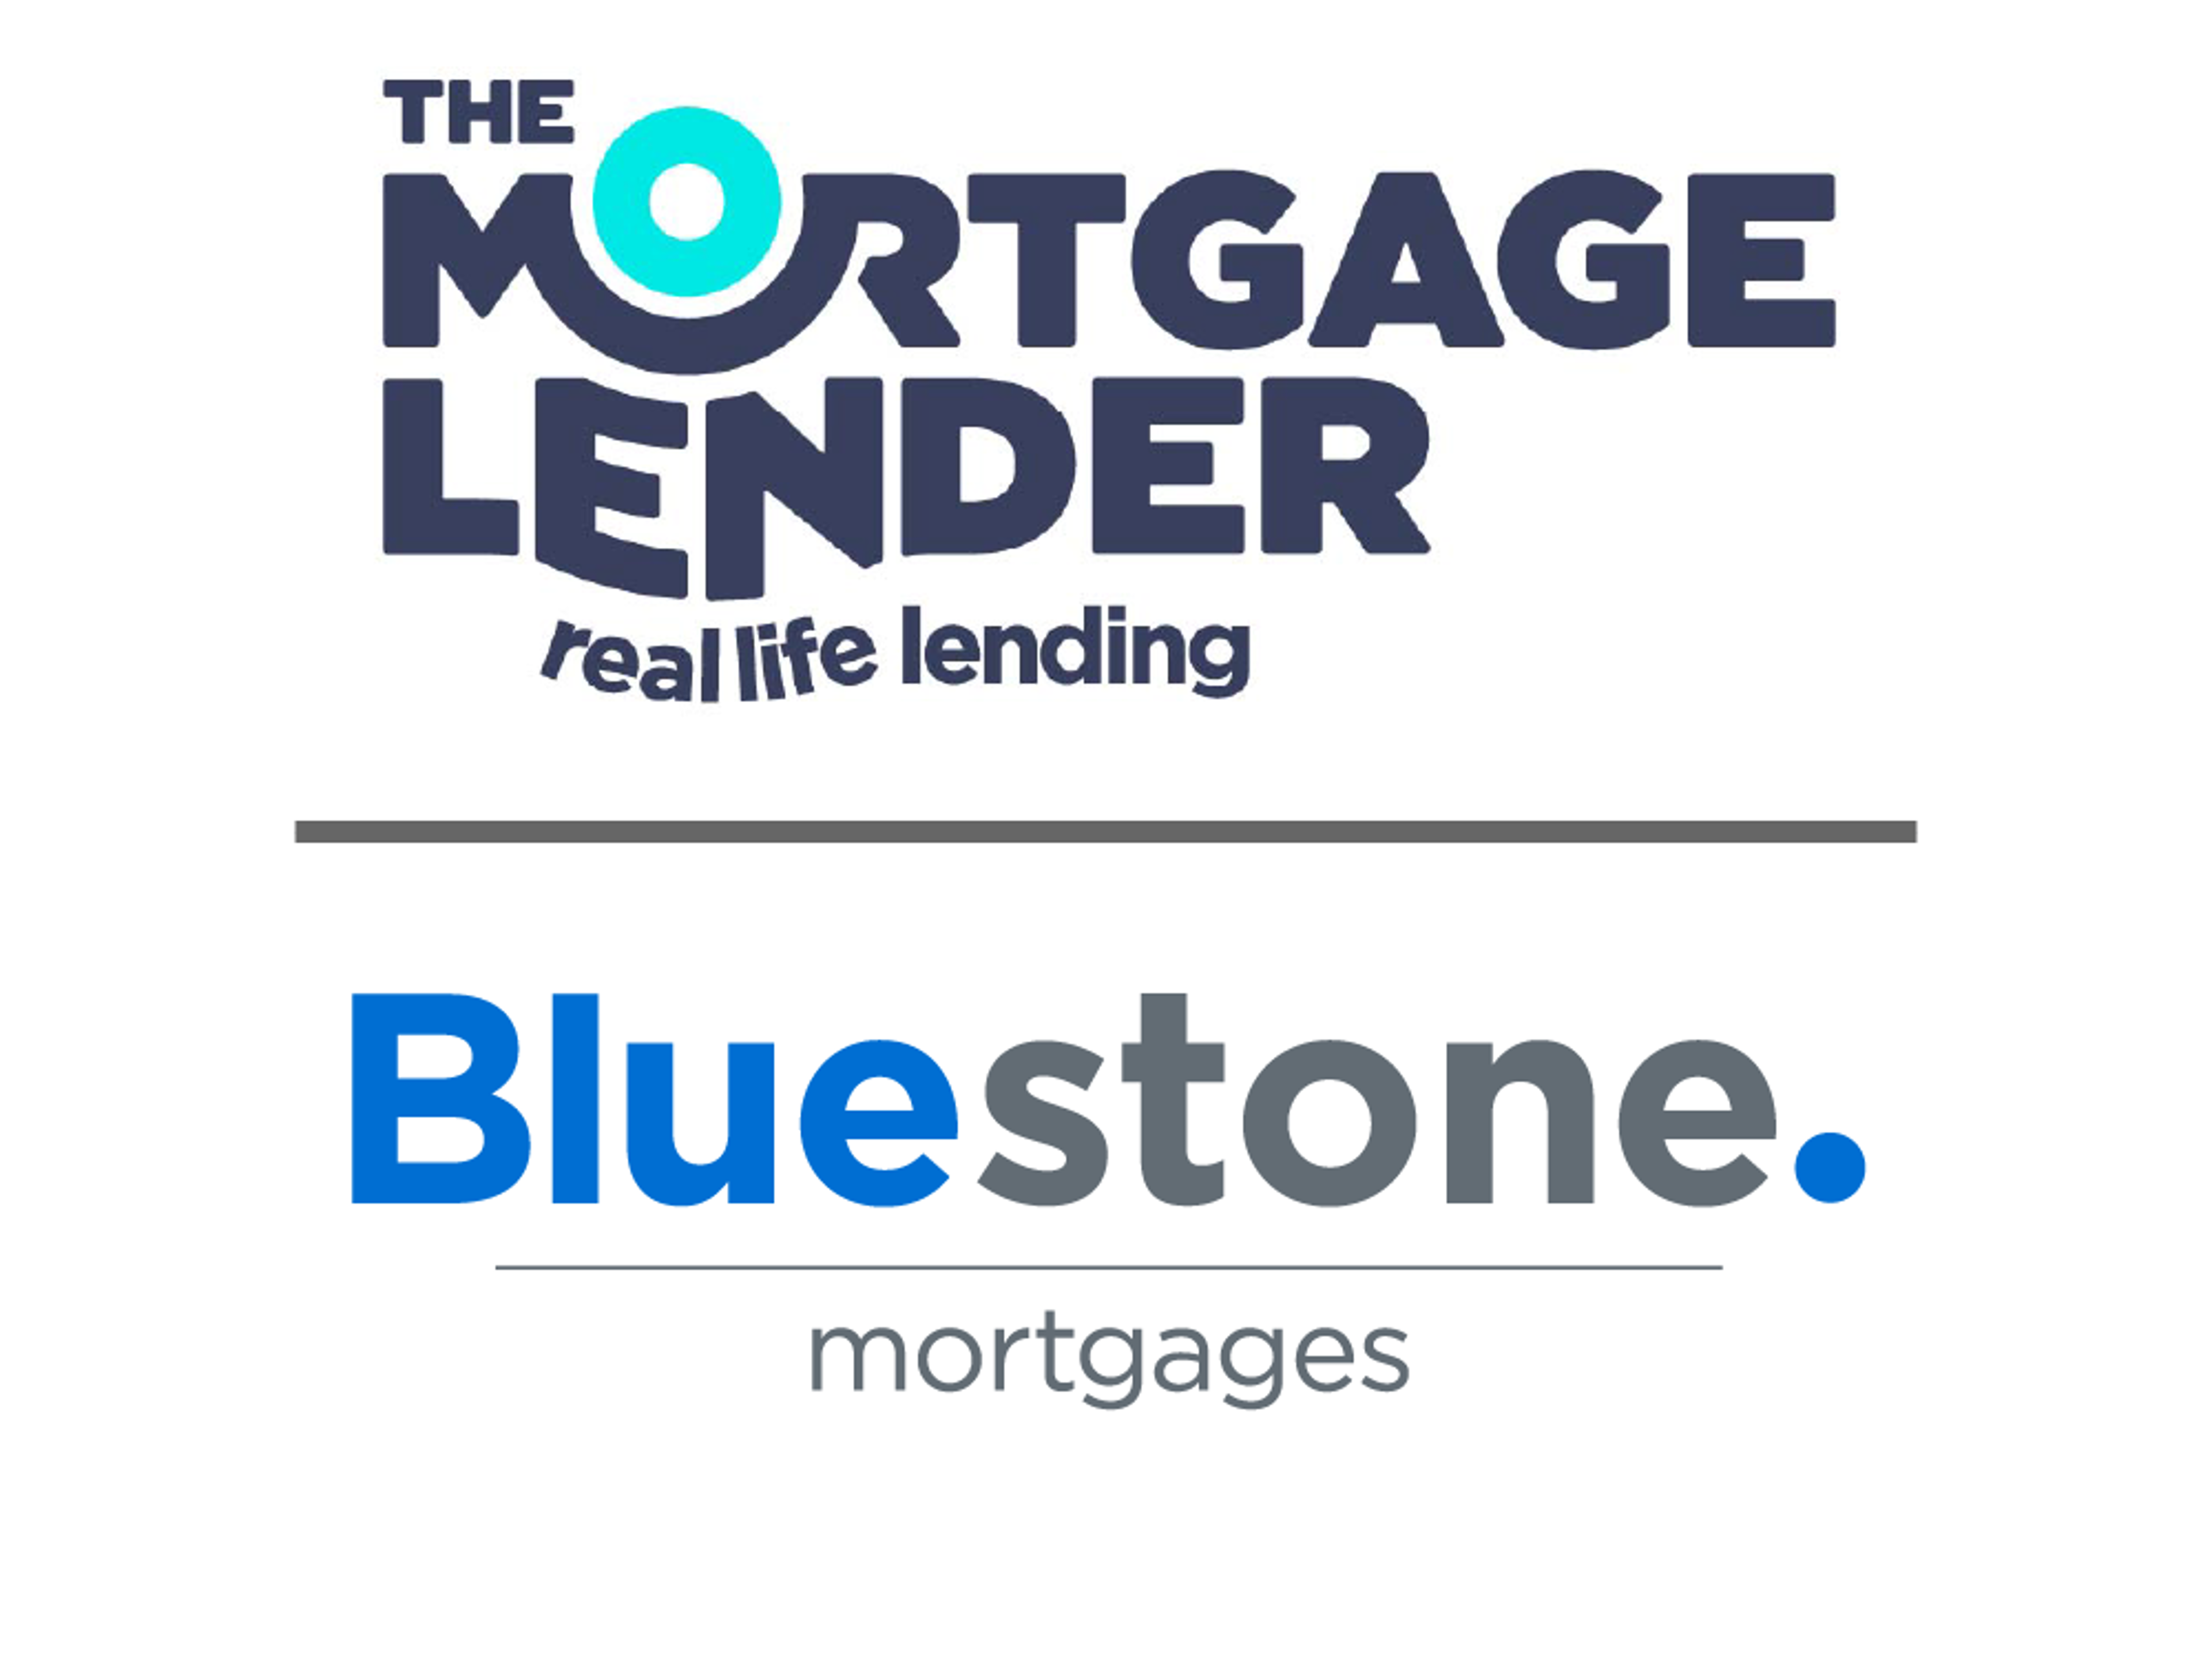 Logos for The Mortgage Lender and Bluestone Mortgages